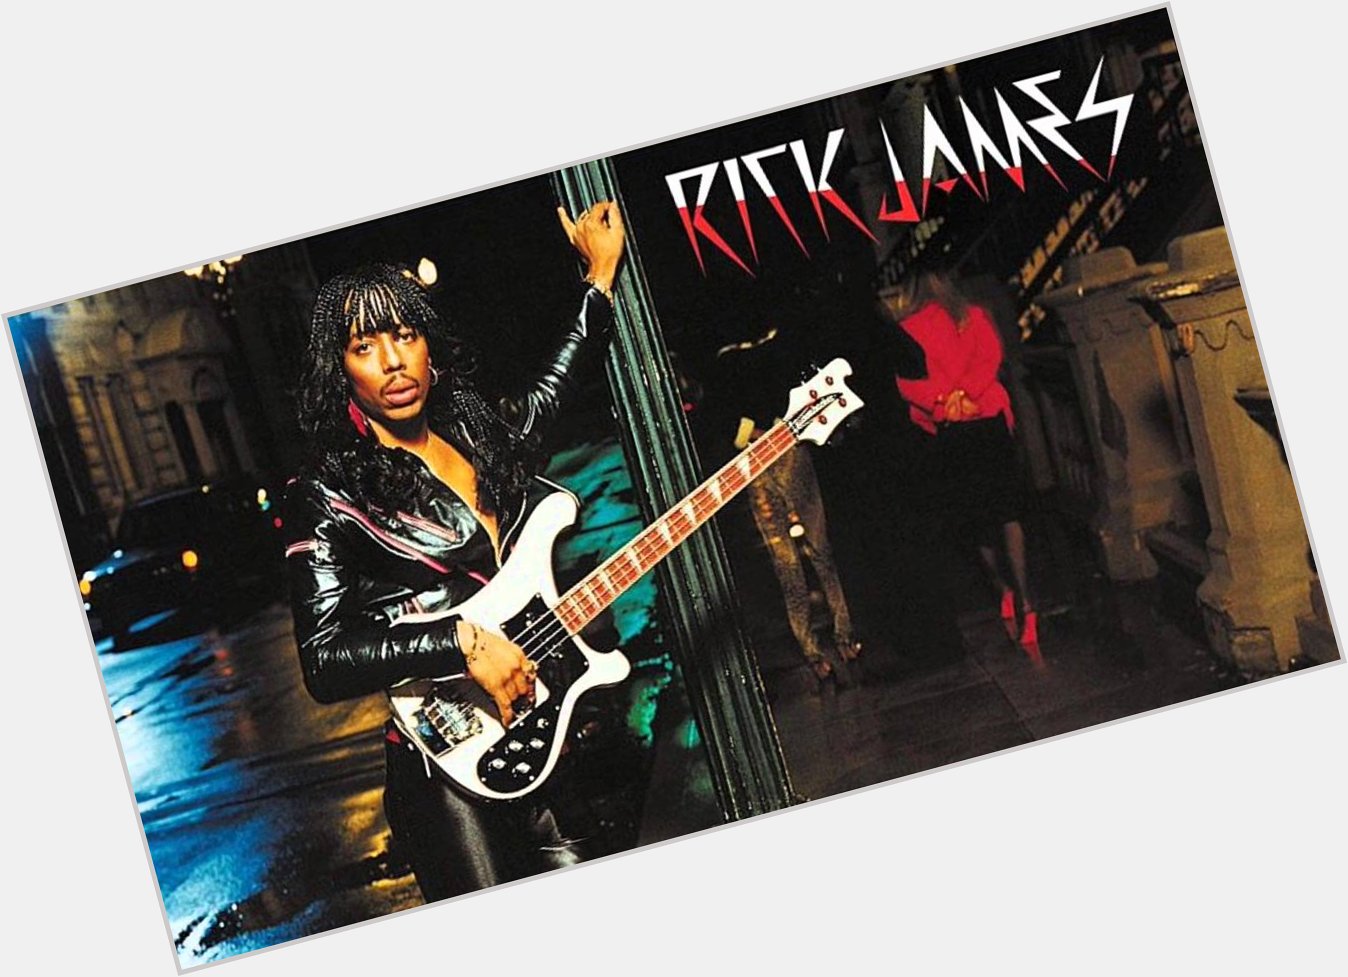 Happy Birthday to Rick James, who would have turned 69 today! 